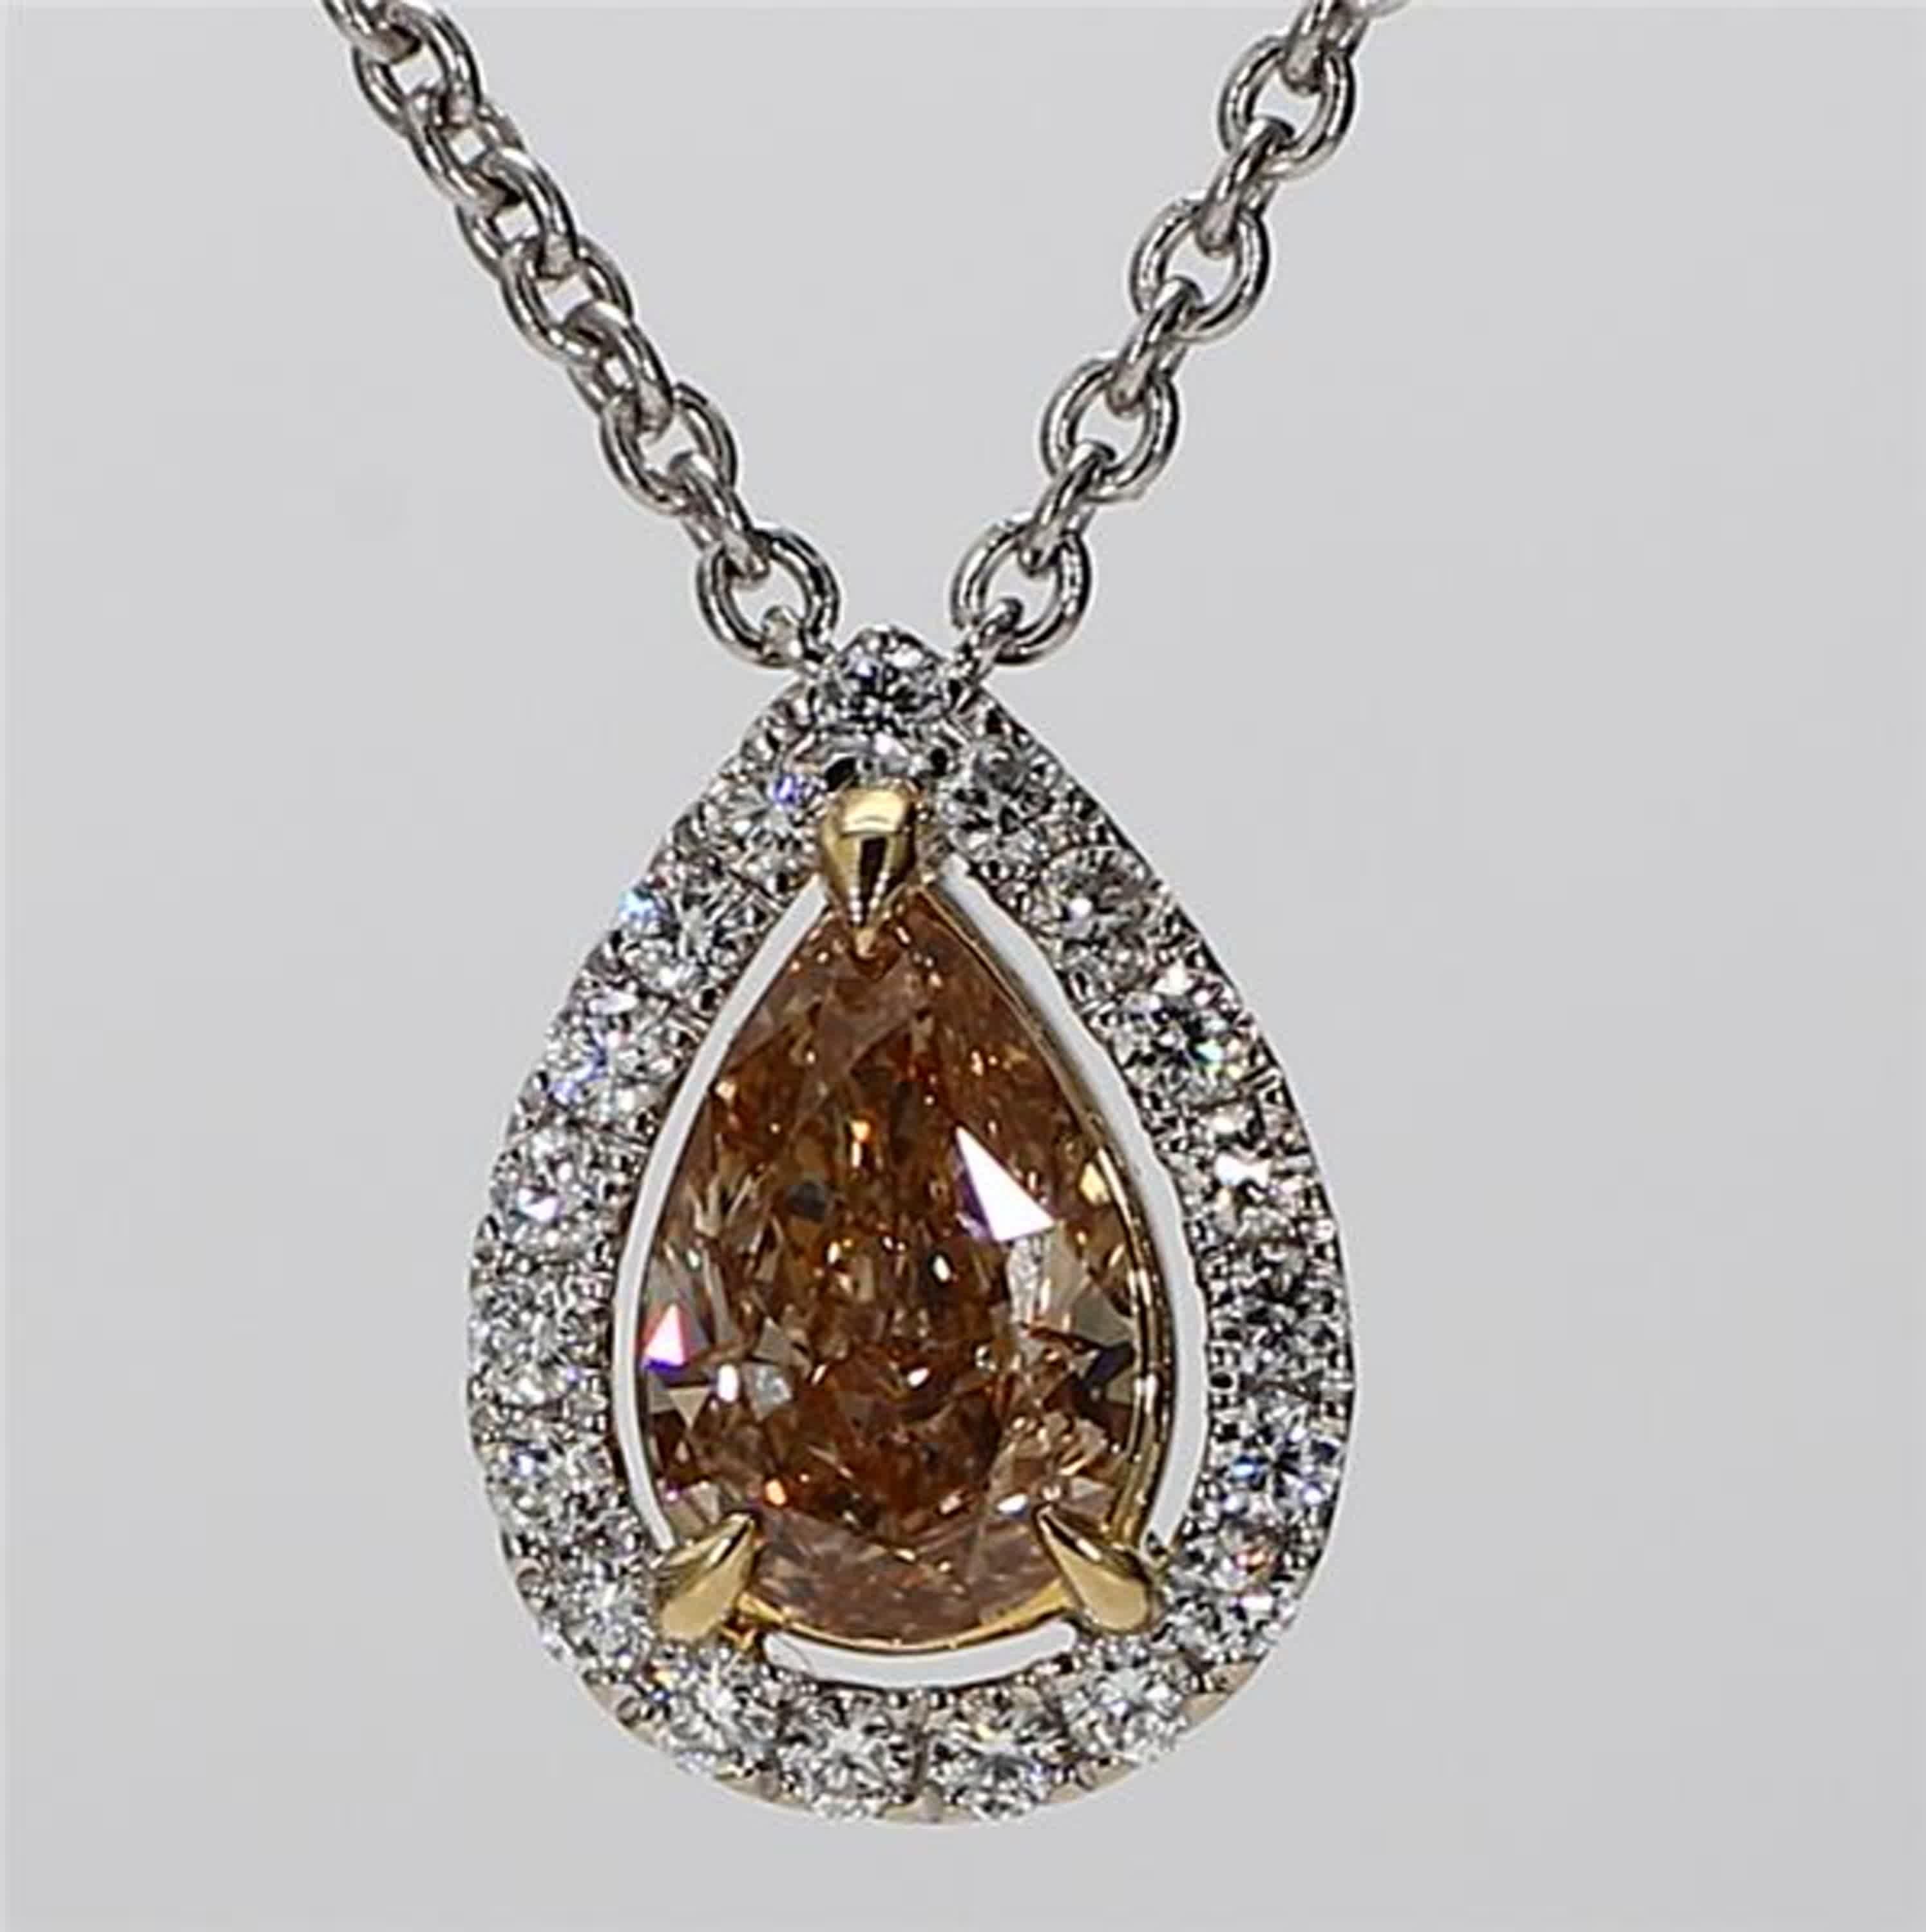 RareGemWorld's classic GIA certified diamond necklace. Mounted in a beautiful 18K Yellow and White Gold setting with a natural pear cut yellow diamond. The yellow diamond is surrounded by small round natural white diamond melee. This necklace is